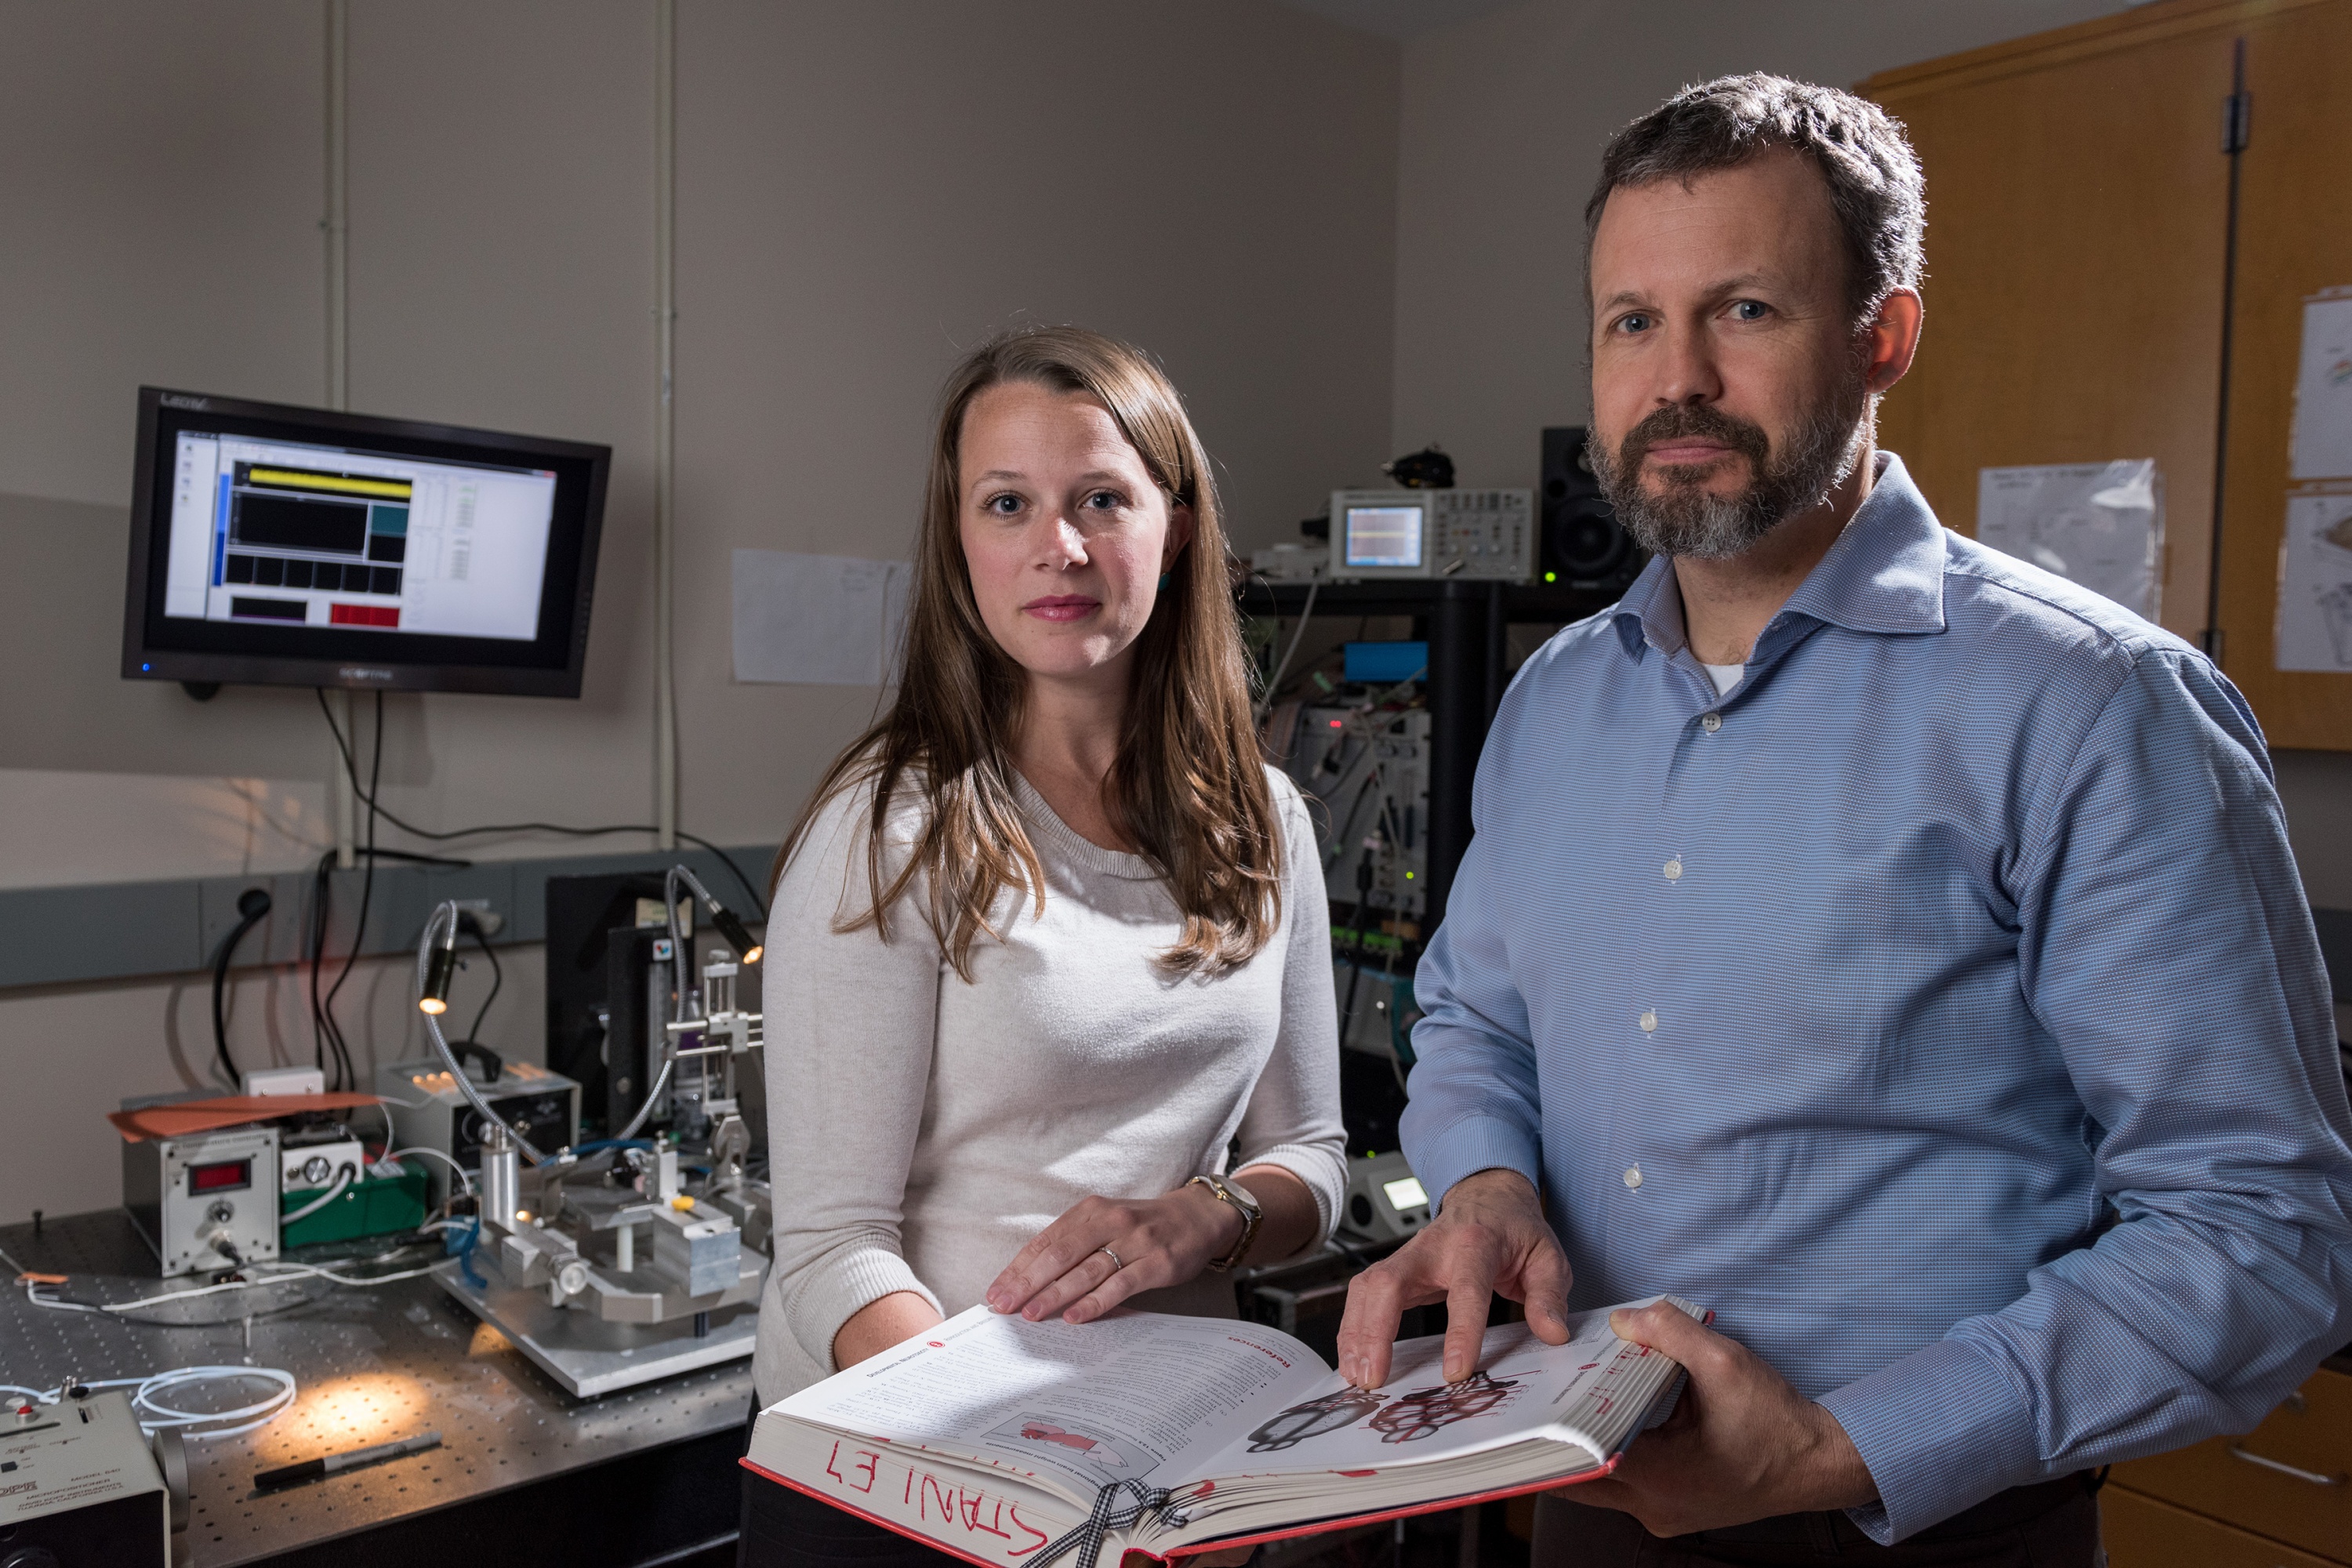 Using optogenetics and other technology, researchers have for the first time precisely manipulated bursting activity of cells in the thalamus, tying it to the sense of touch. Shown are Georgia Tech graduate student Clarissa Whitmire and Georgia Tech professor Garrett Stanley.(Credit: Rob Felt, Georgia Tech)